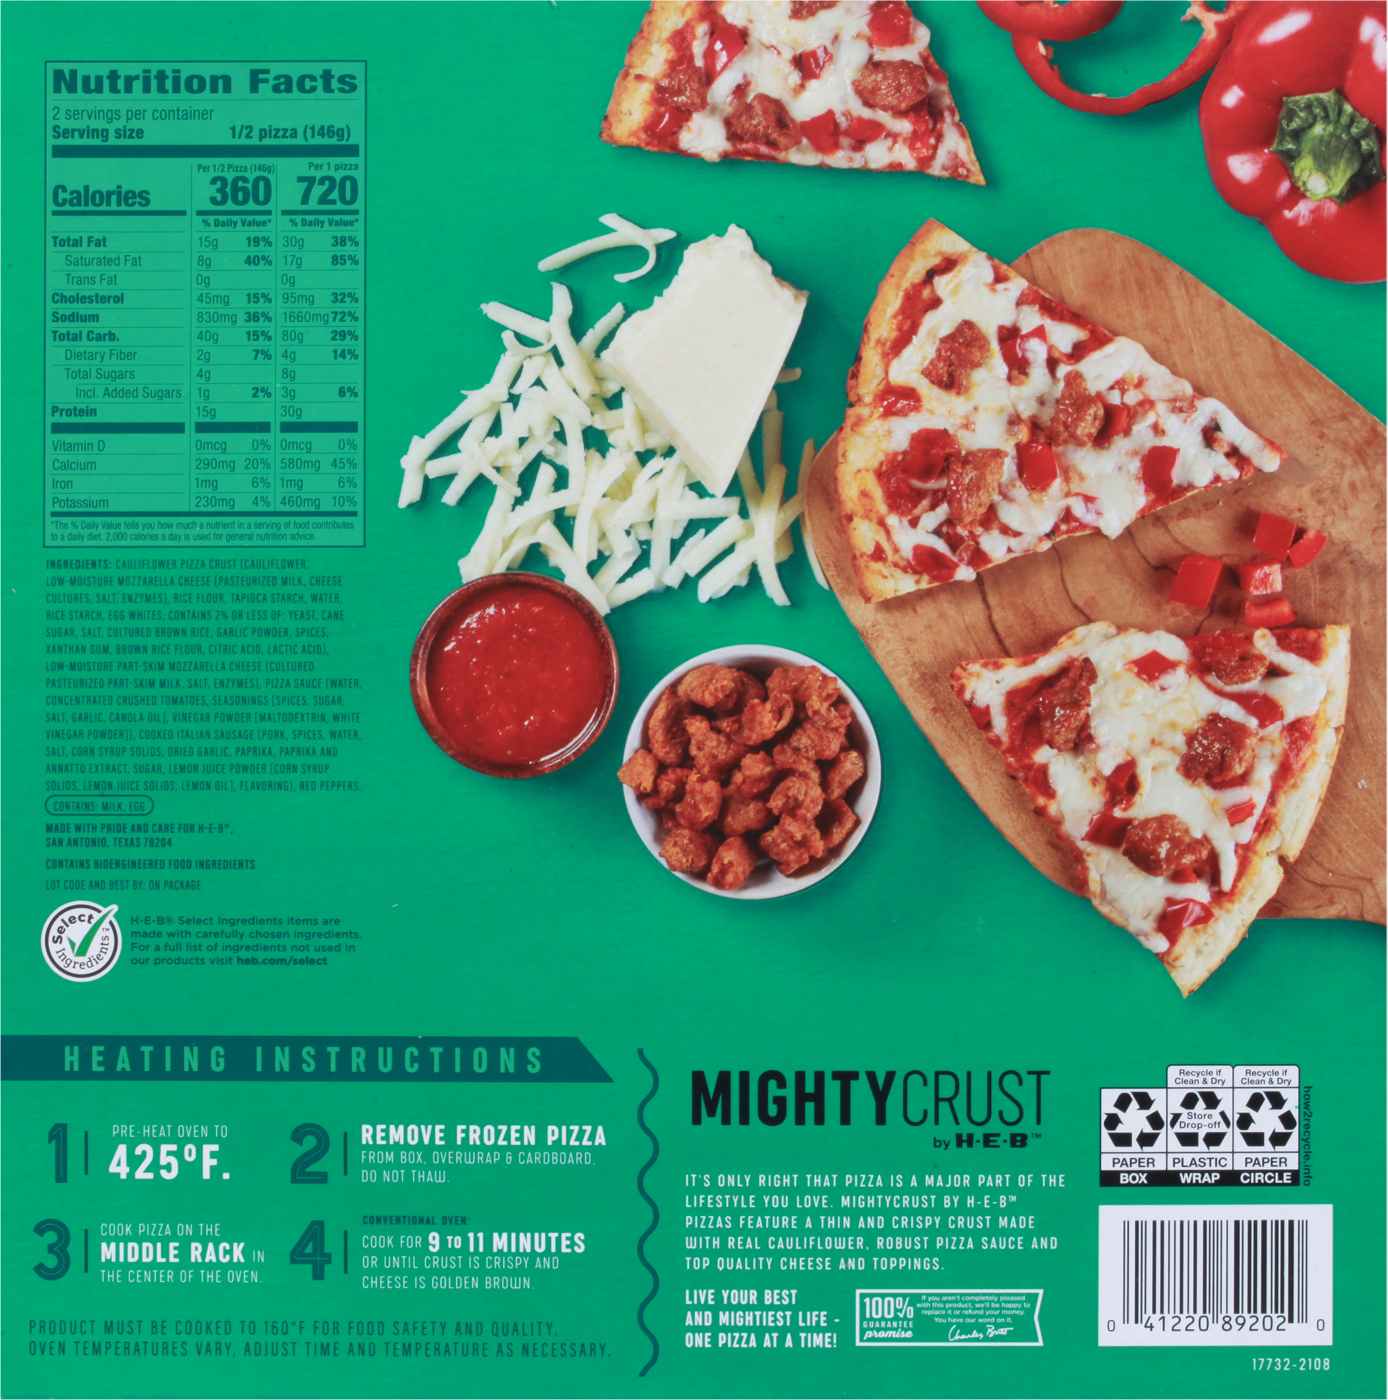 MightyCrust by H-E-B Frozen Cauliflower Pizza - Italian Sausage & Red Peppers; image 2 of 2